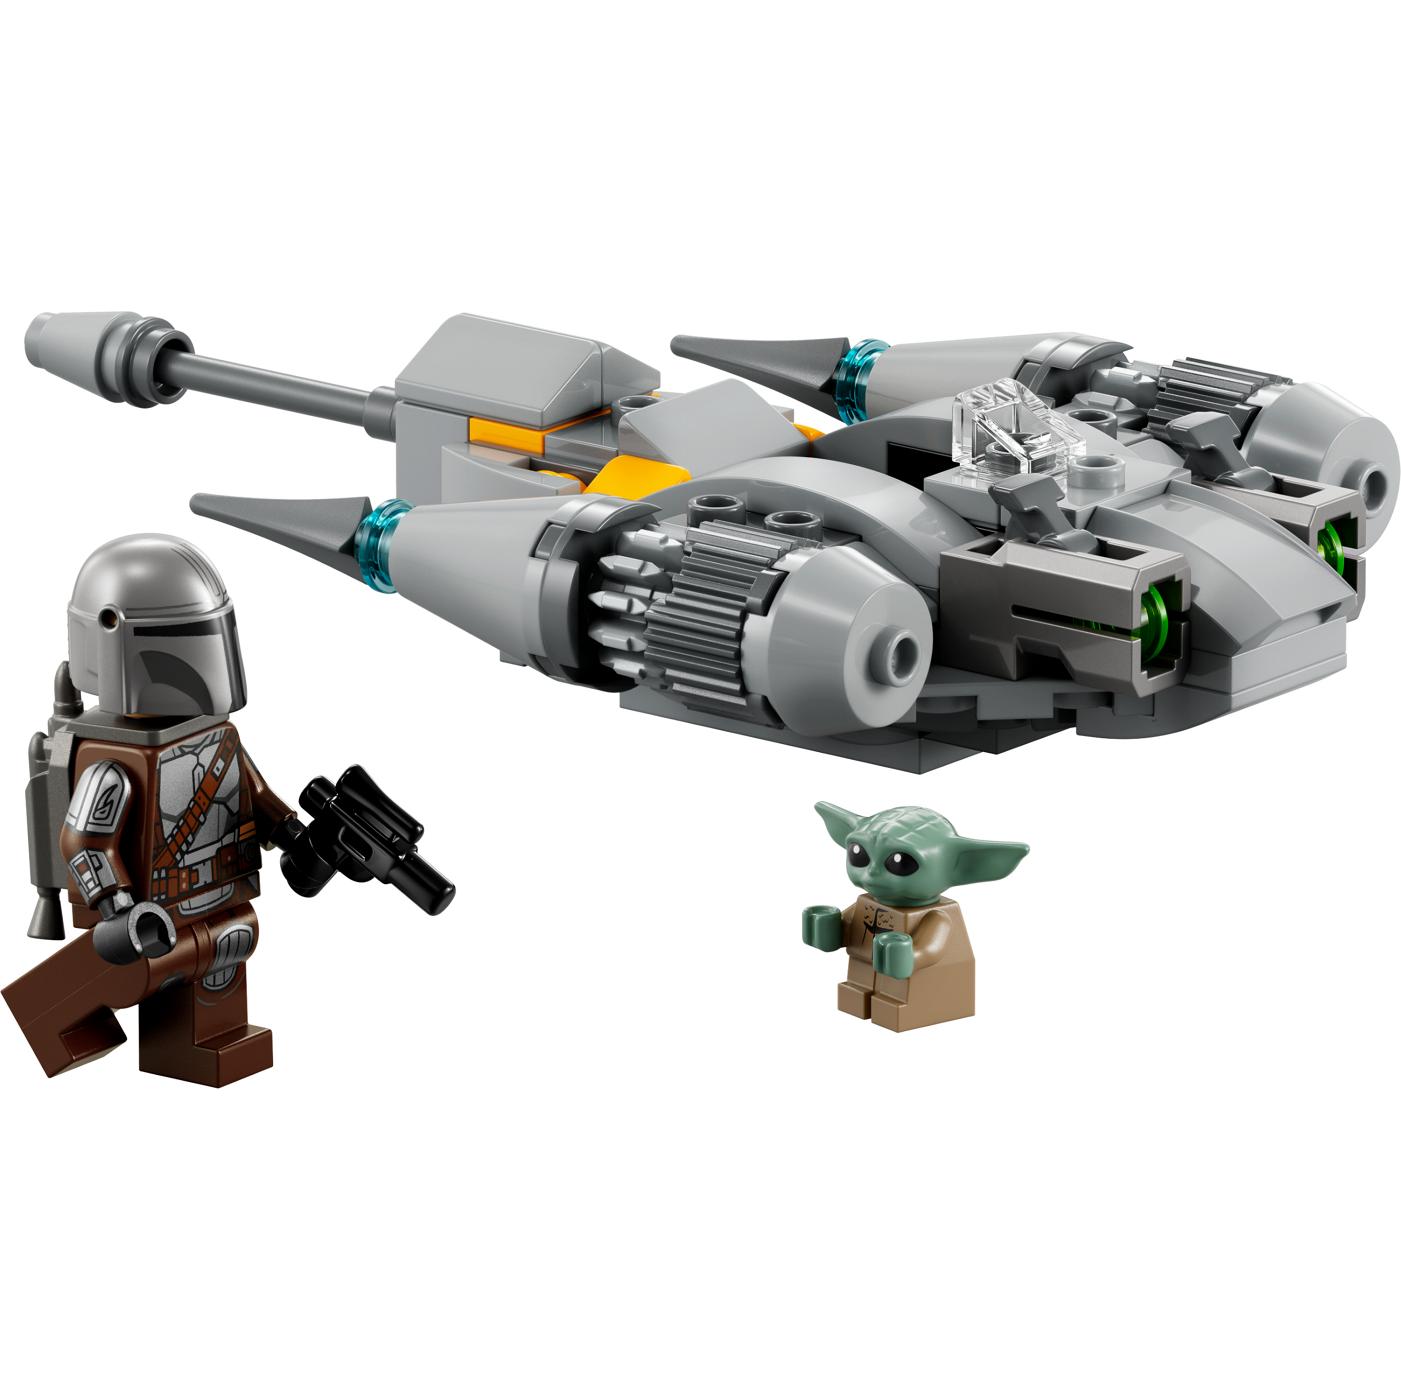 LEGO Star Wars The Mandalorian N-1 Starfighter Microfighter Set; image 1 of 2